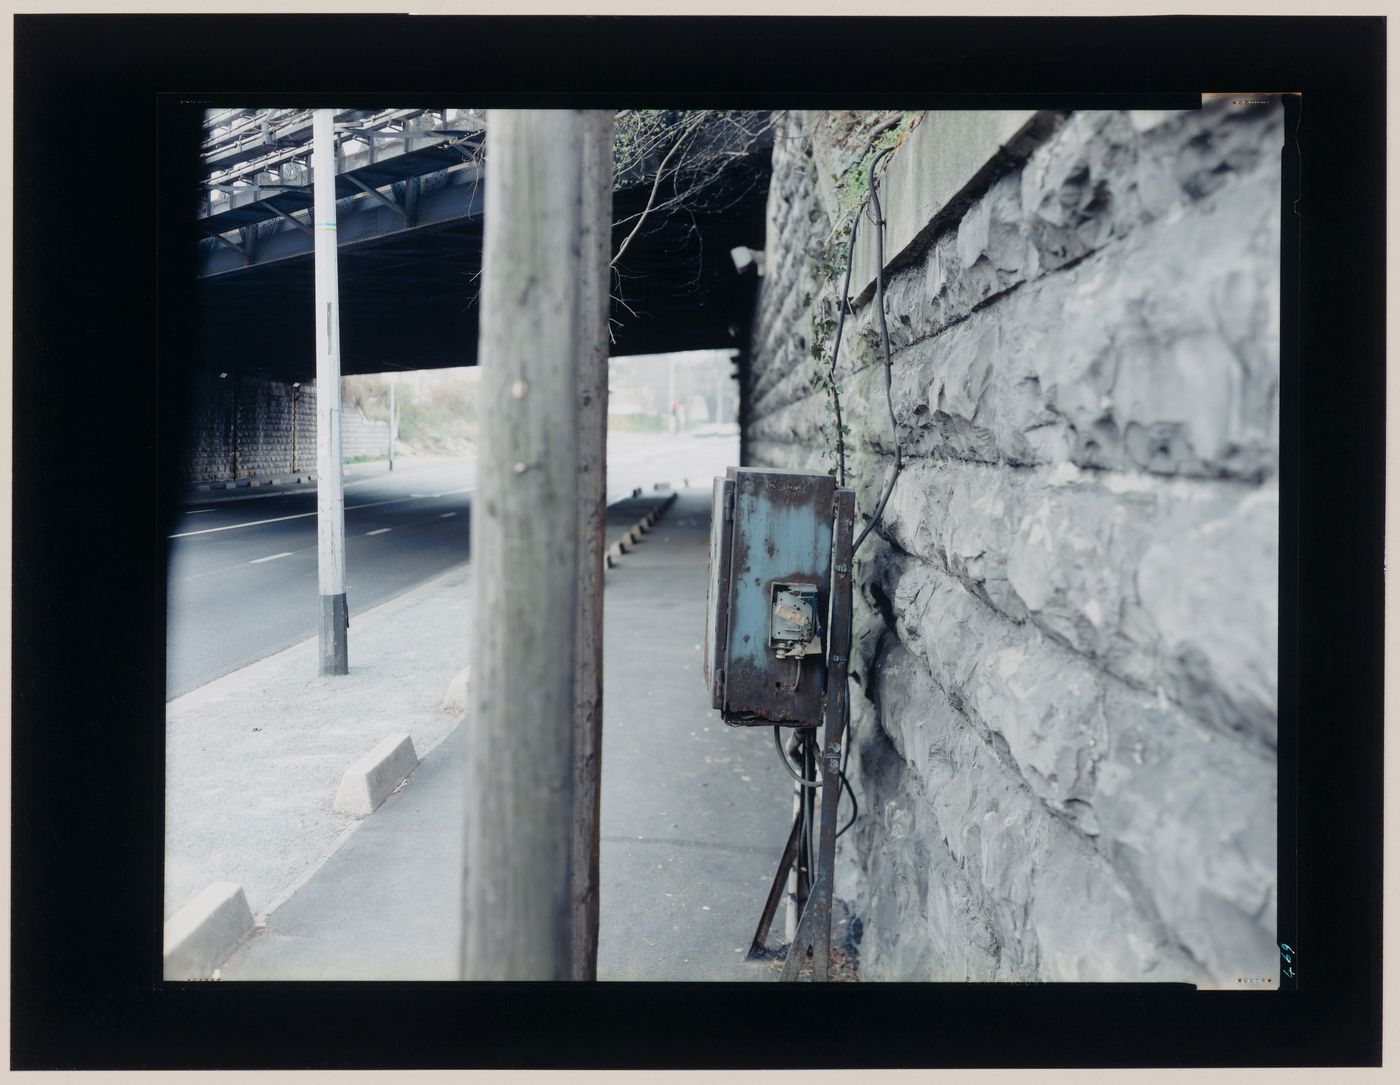 View of a road under an overpass showing a stone wall, posts and a call box, Saint-Denis, France (from the series "In between cities")